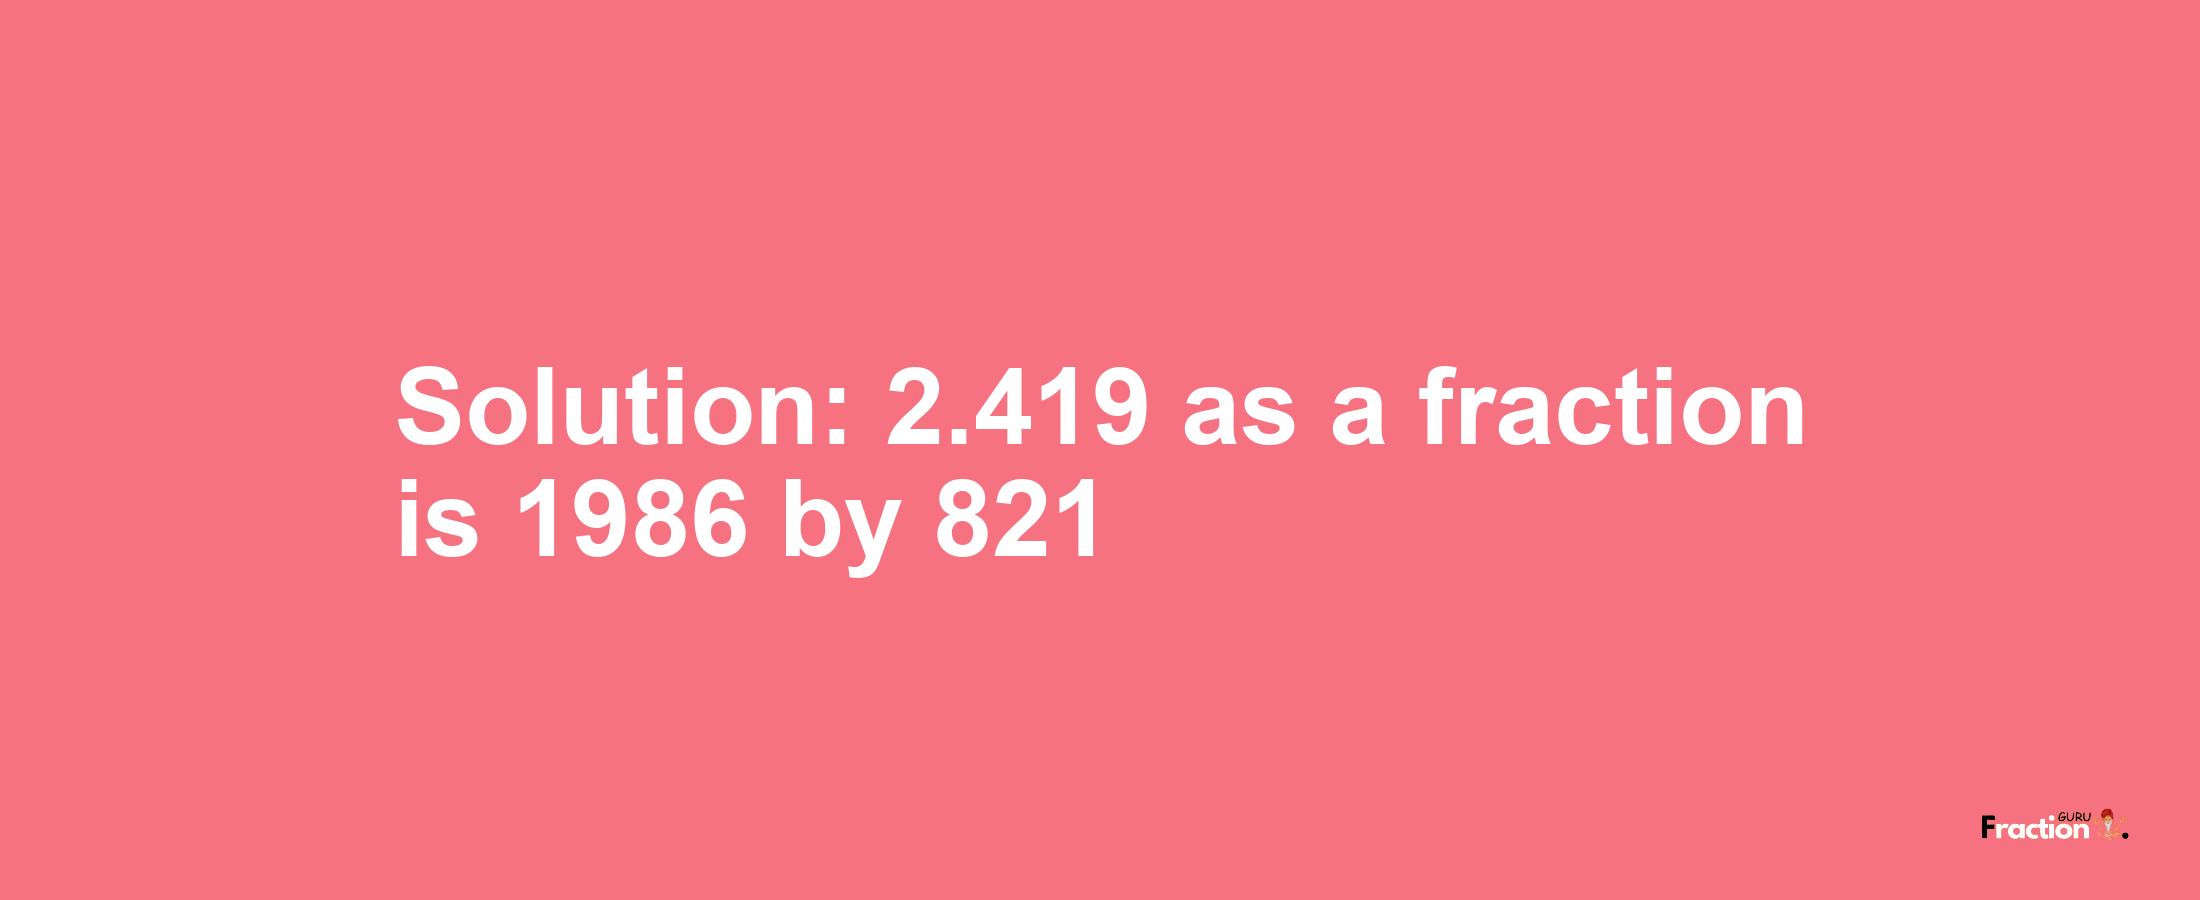 Solution:2.419 as a fraction is 1986/821